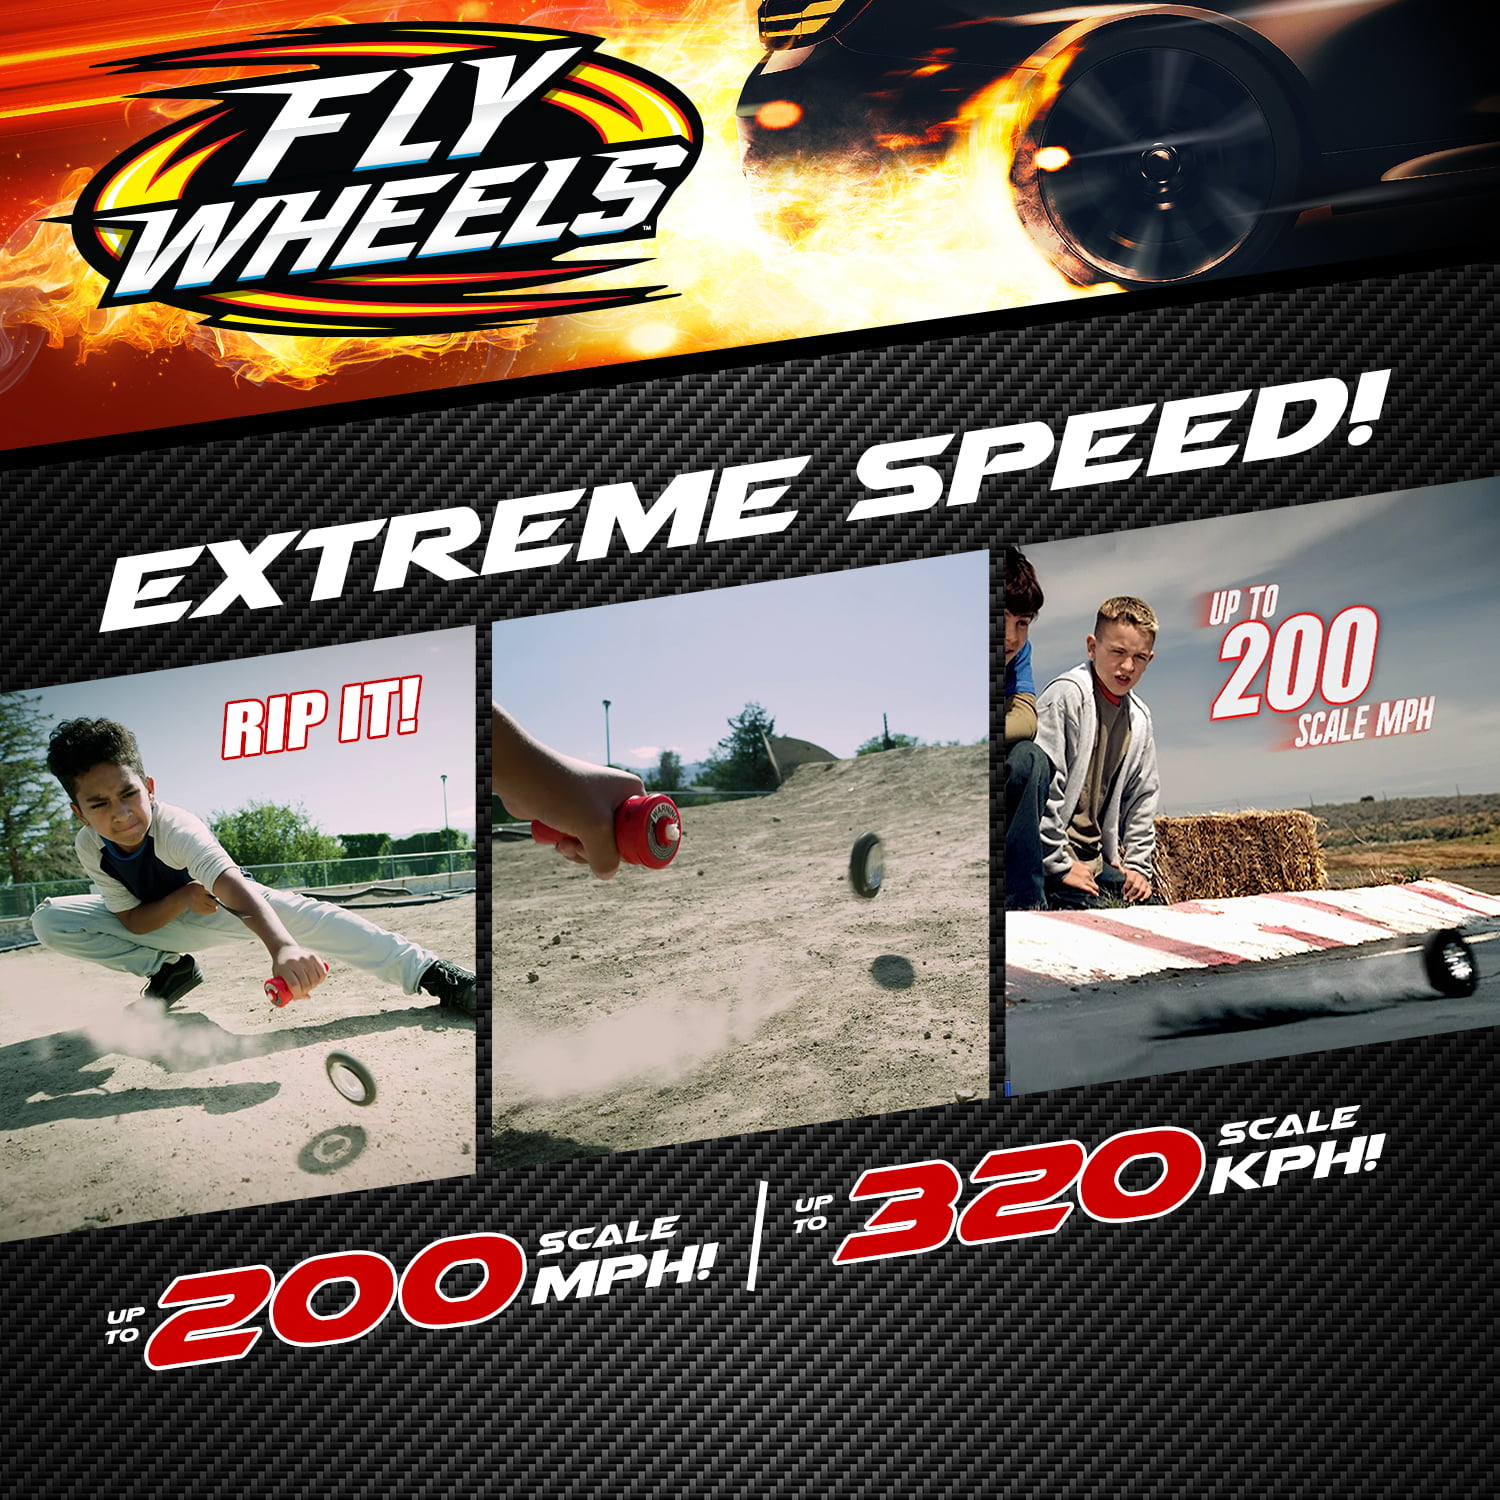 2 Street Wheels Rip it up to 200 Scale MPH Fly Wheels Launcher Fast Speed 